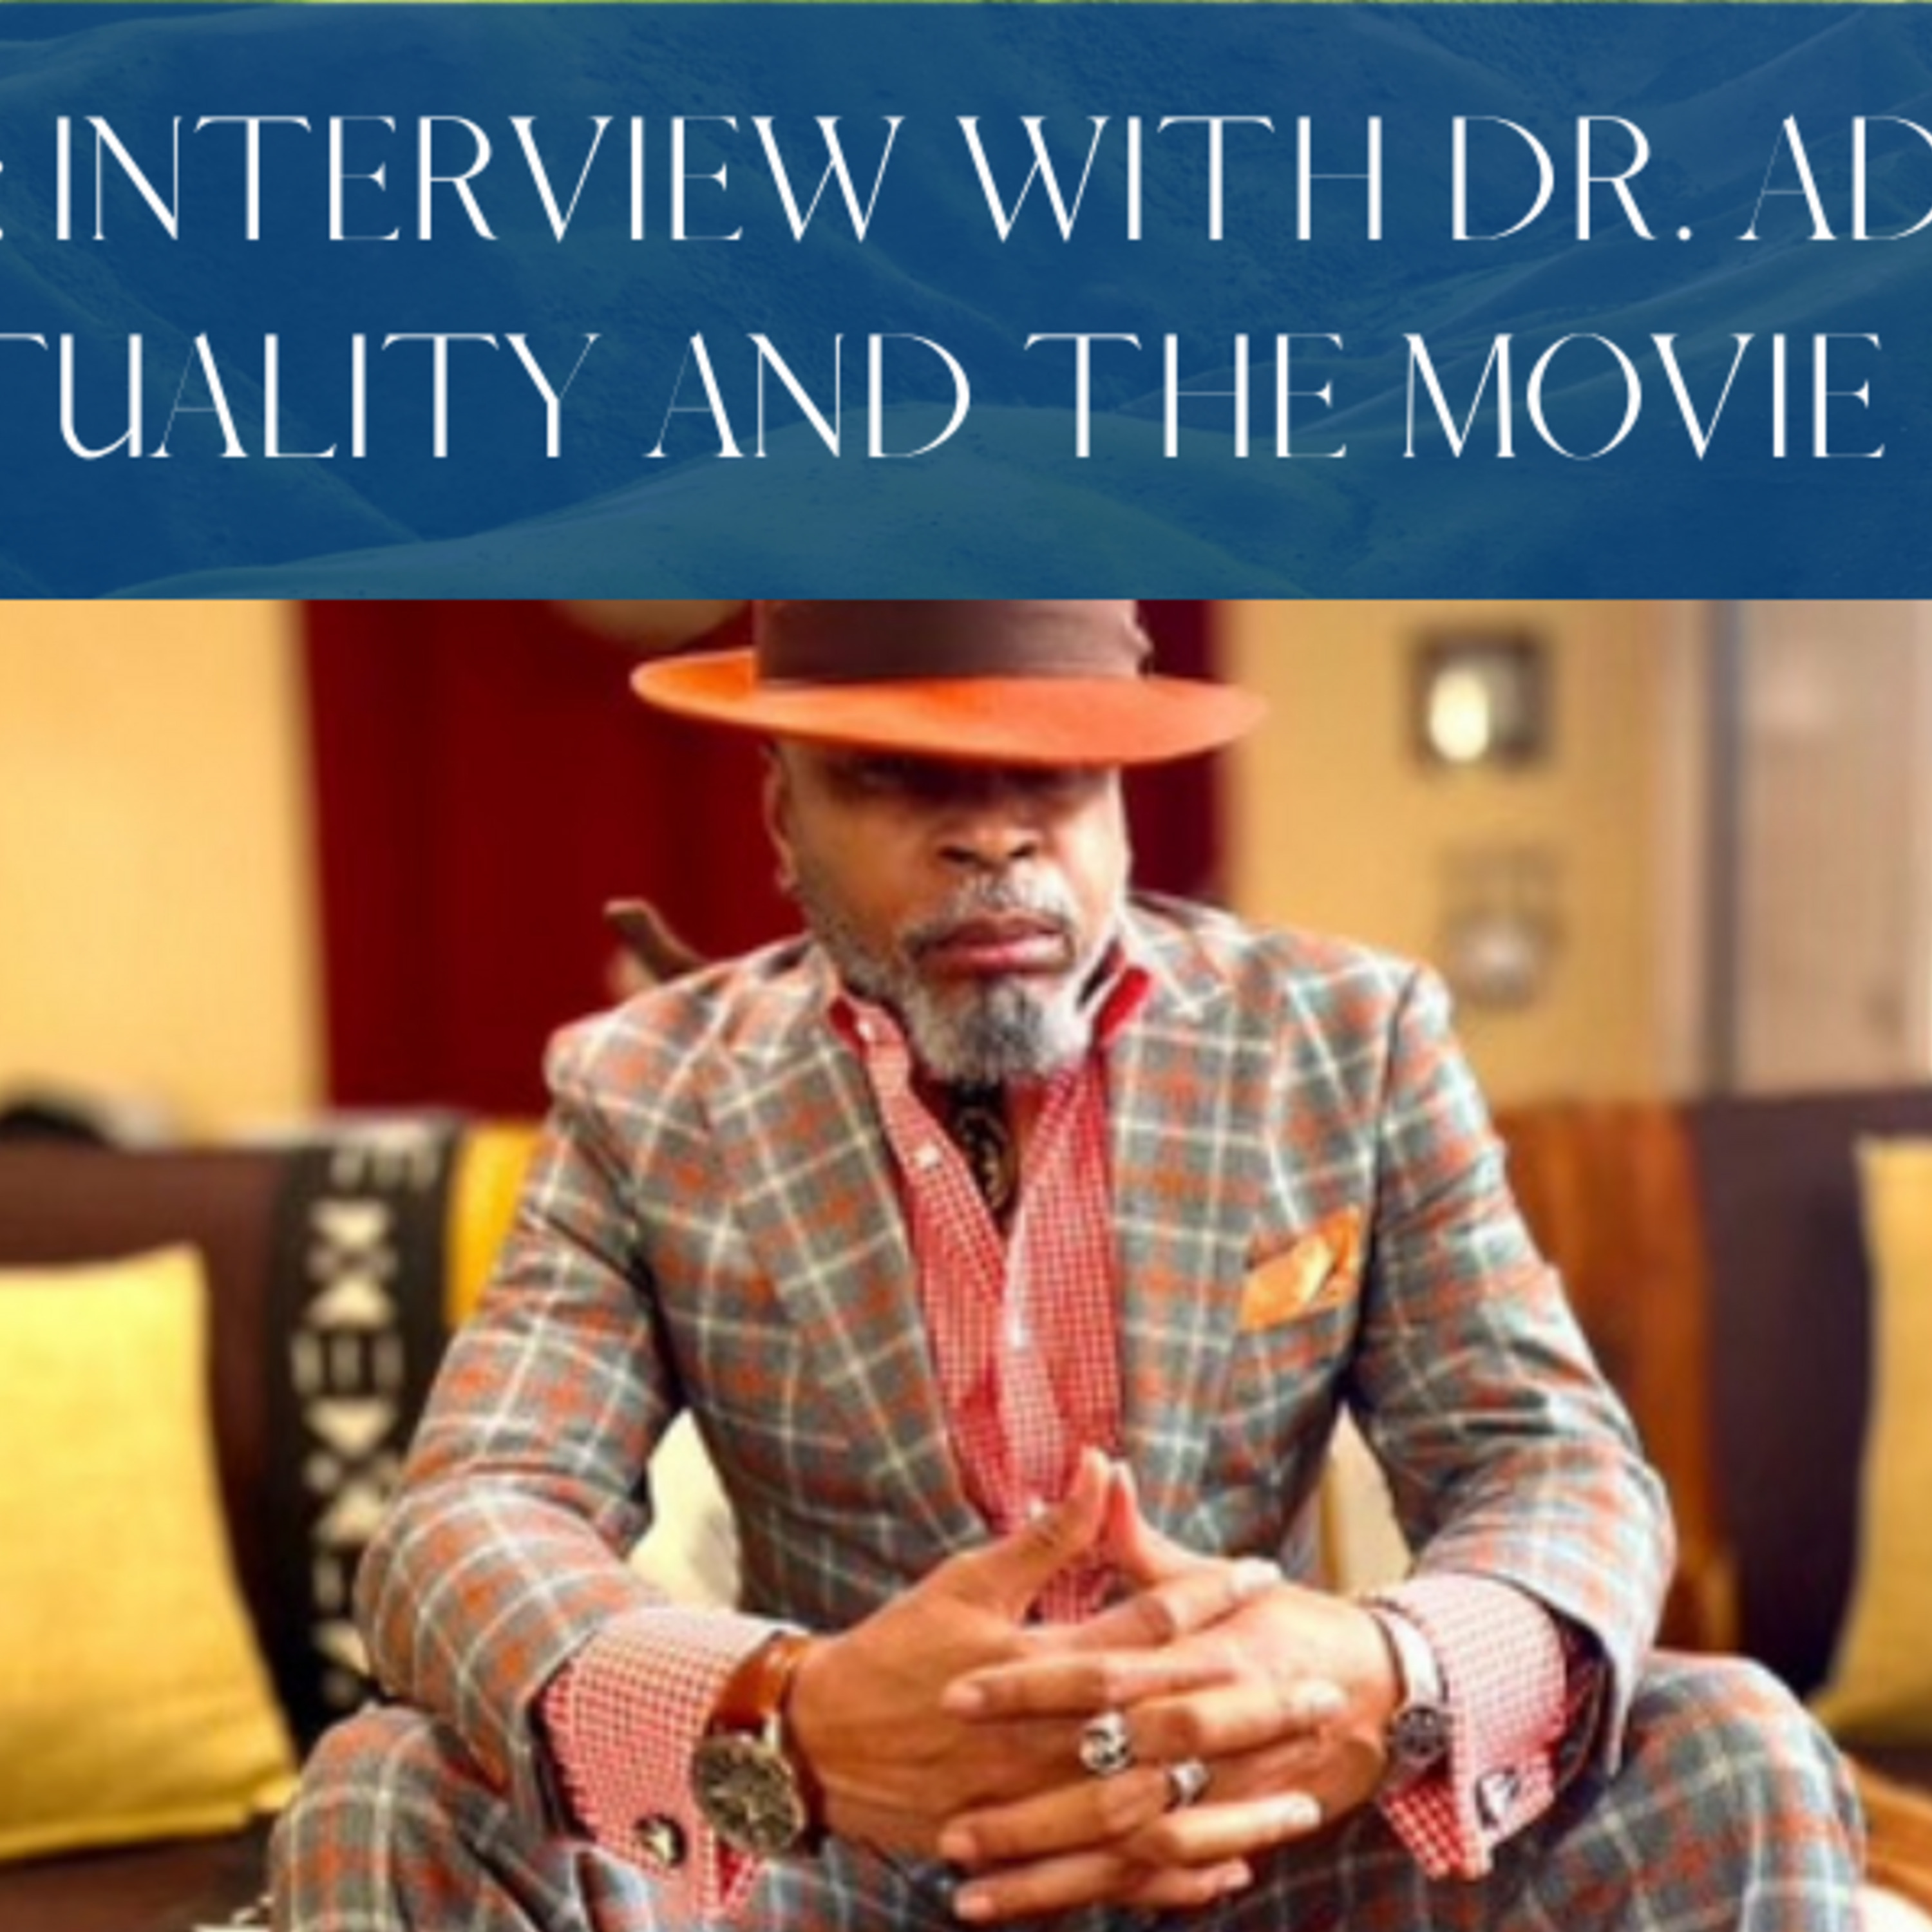 Episode 39: Interview with Dr. Adisa Ajamu - Spirituality and the movie Soul.